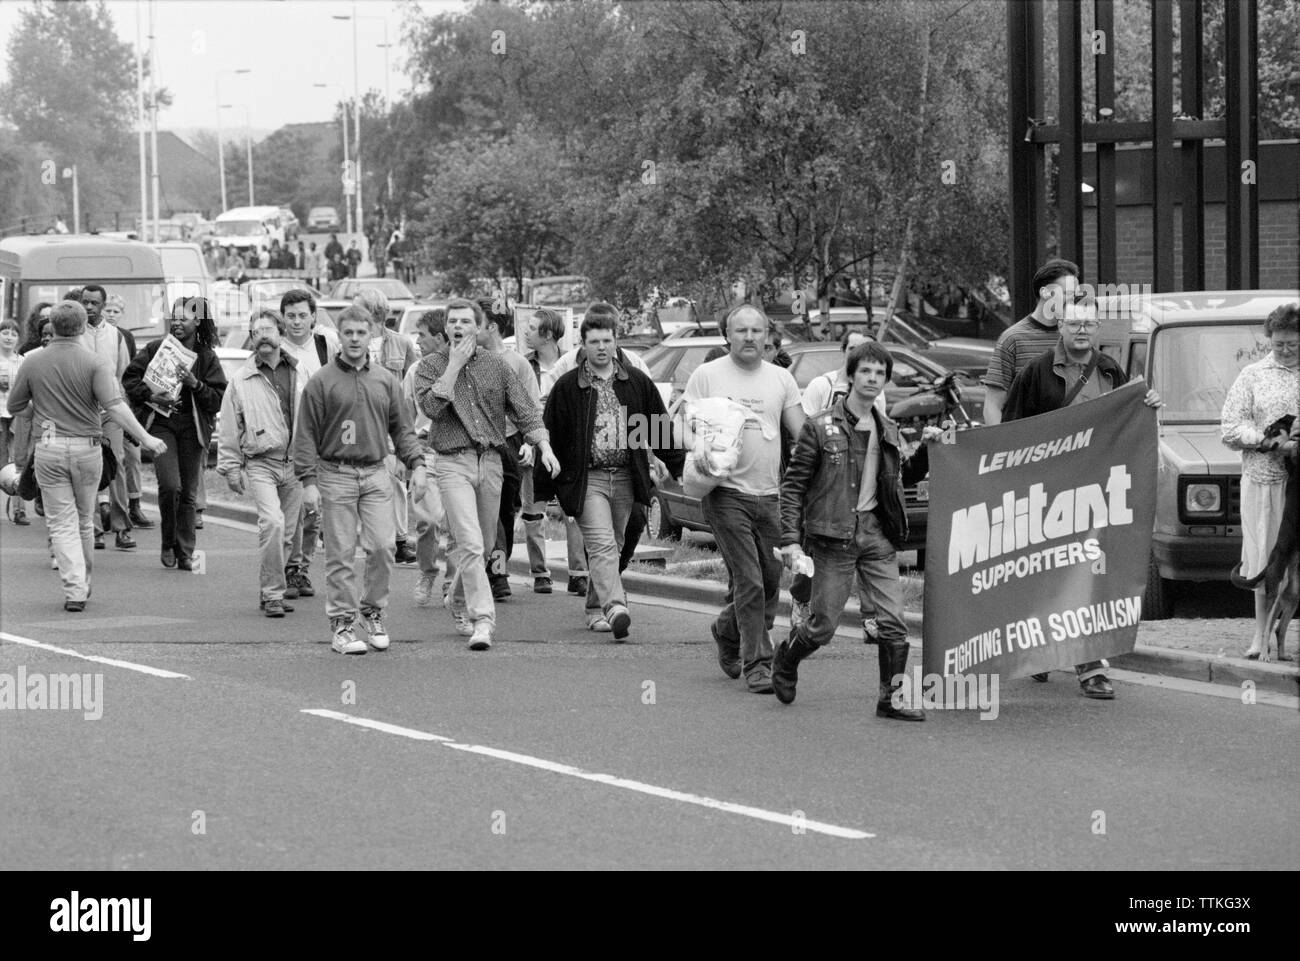 A counter demonstration march in East London, England, by Lewisham Socialist Militant supporters, marching against the BNP, British National Party, a far right political party active from 1982 until the present day. Stock Photo